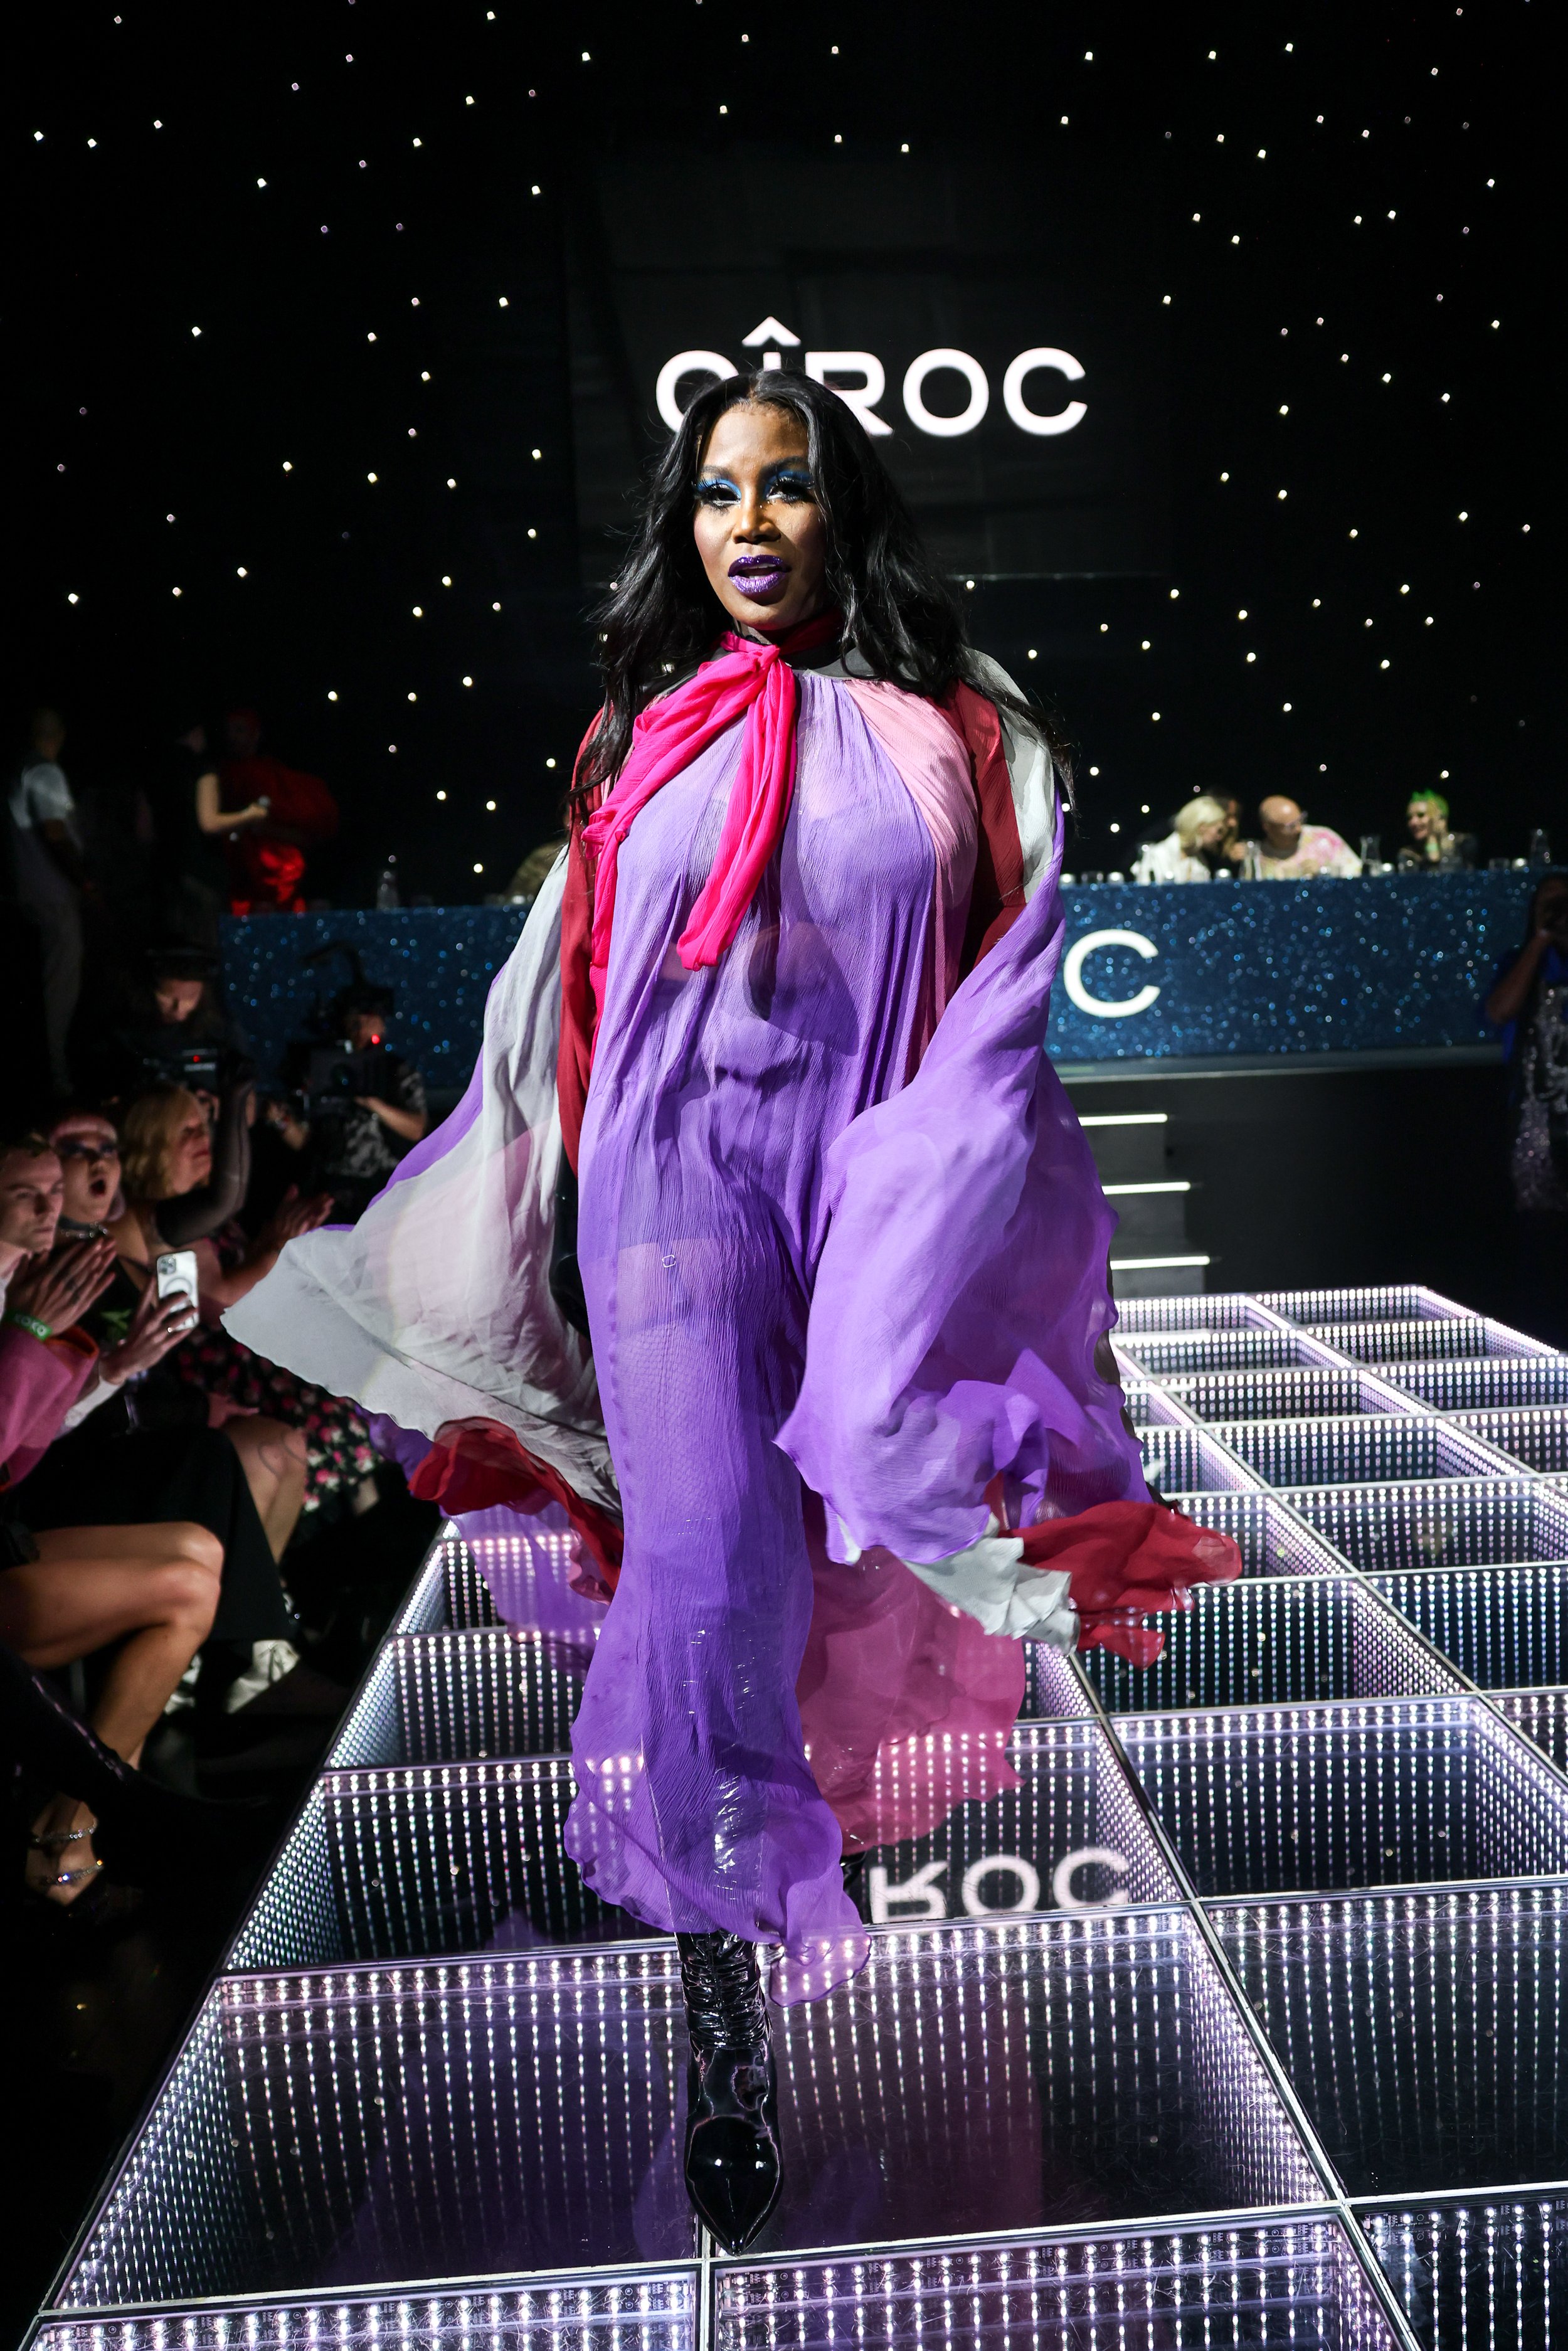  LONDON, ENGLAND - JUNE 30: Devine Gucci attends the CÎROC Iconic Ball in support of Not A Phase at KOKO on June 30, 2022 in London, England. Today, the first ever CÎROC Iconic Ball brought the house down at legendary KOKO Camden in celebration of th